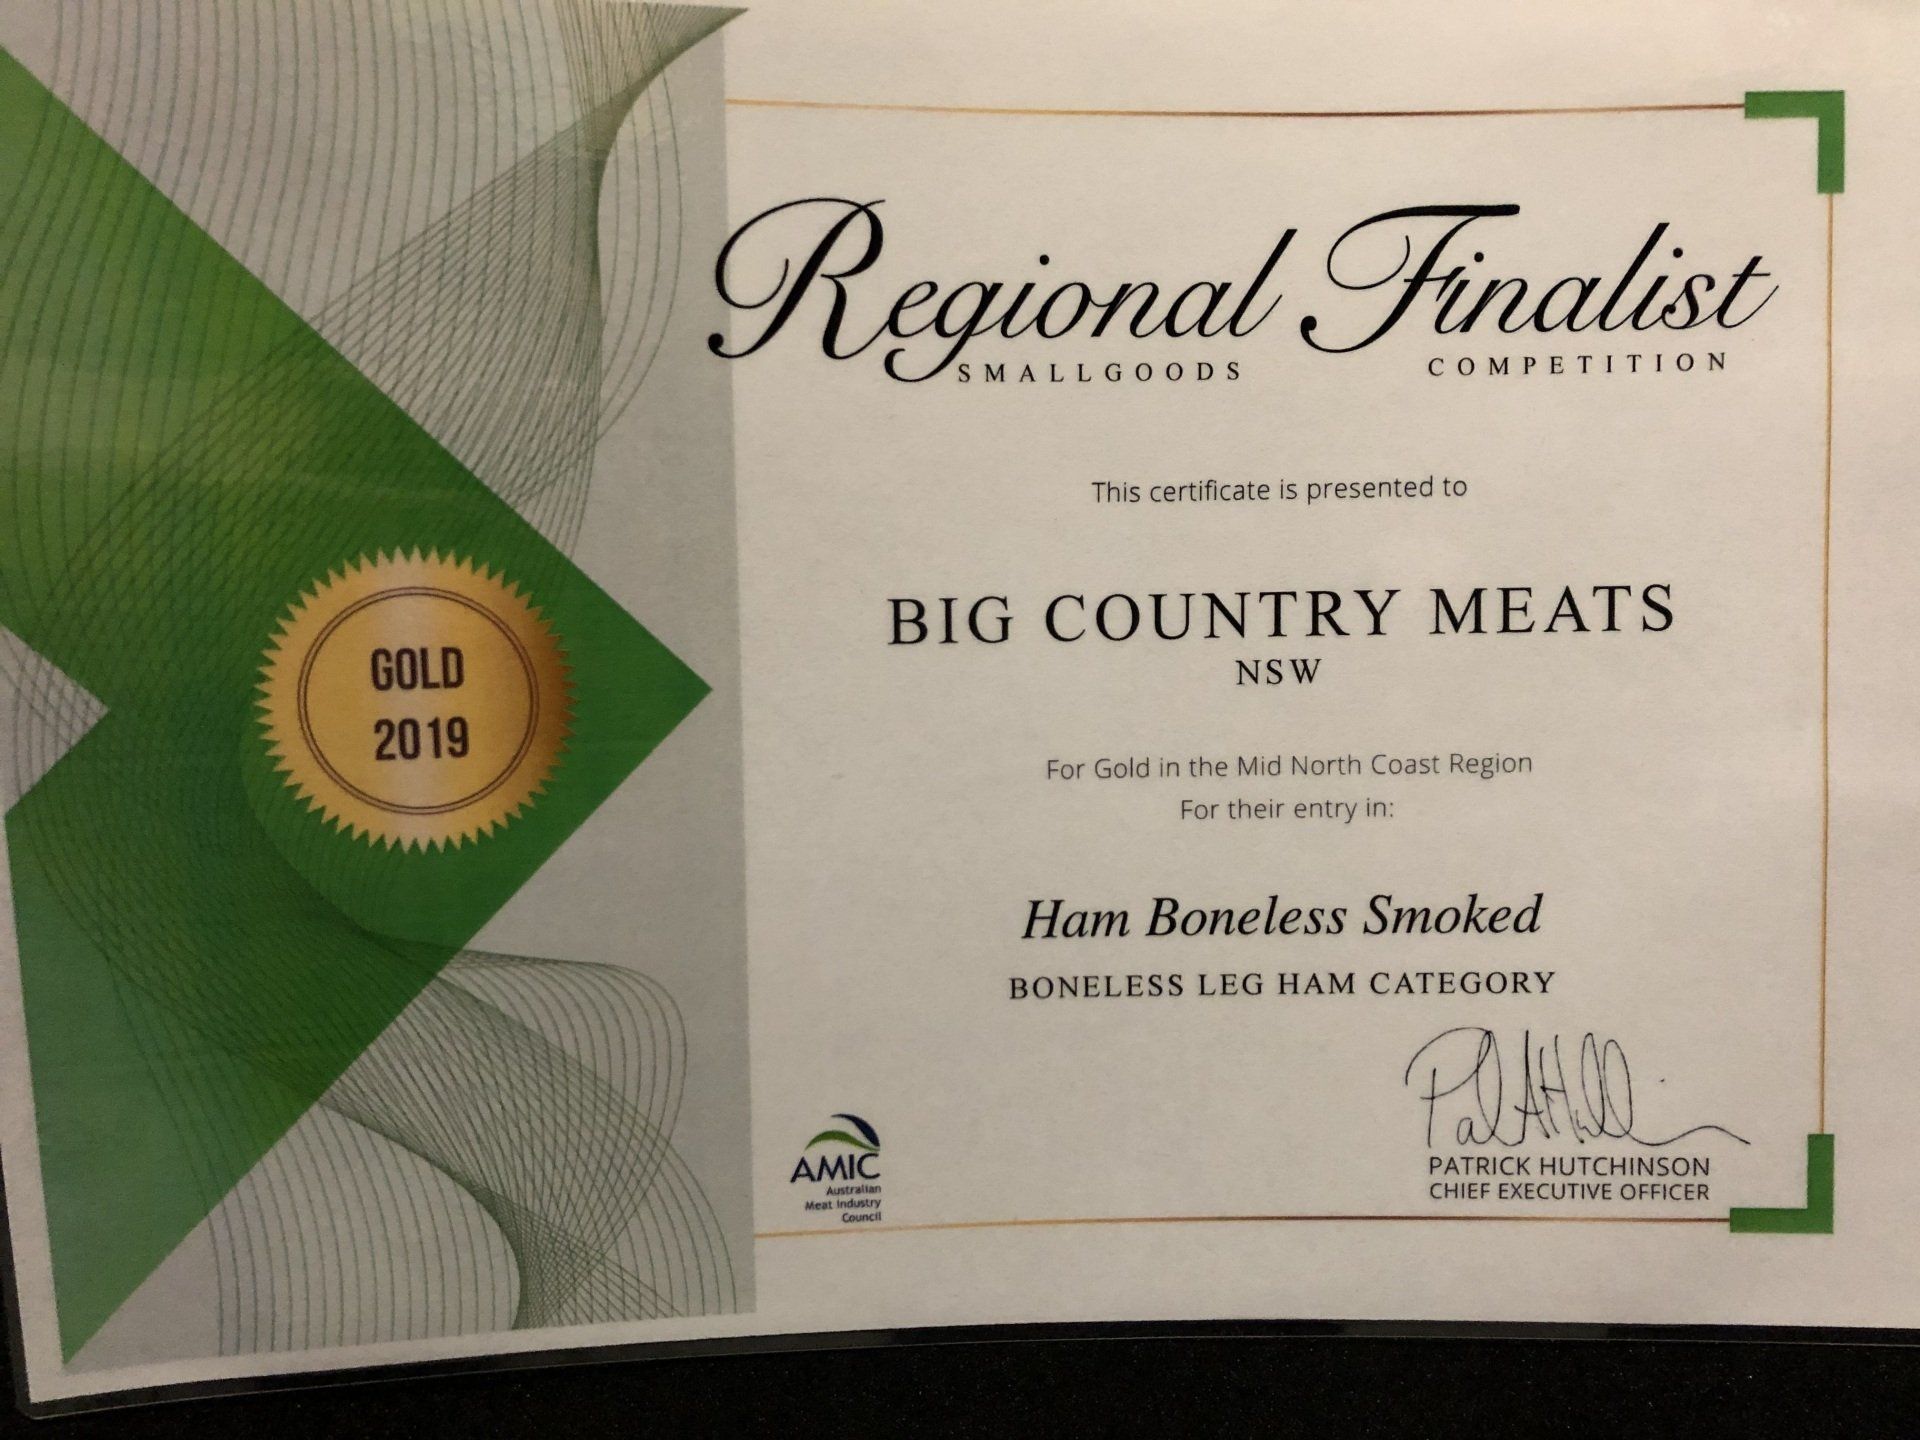 Gold in the 2019 Regional Smallgoods Competition for Boneless Leg Ham